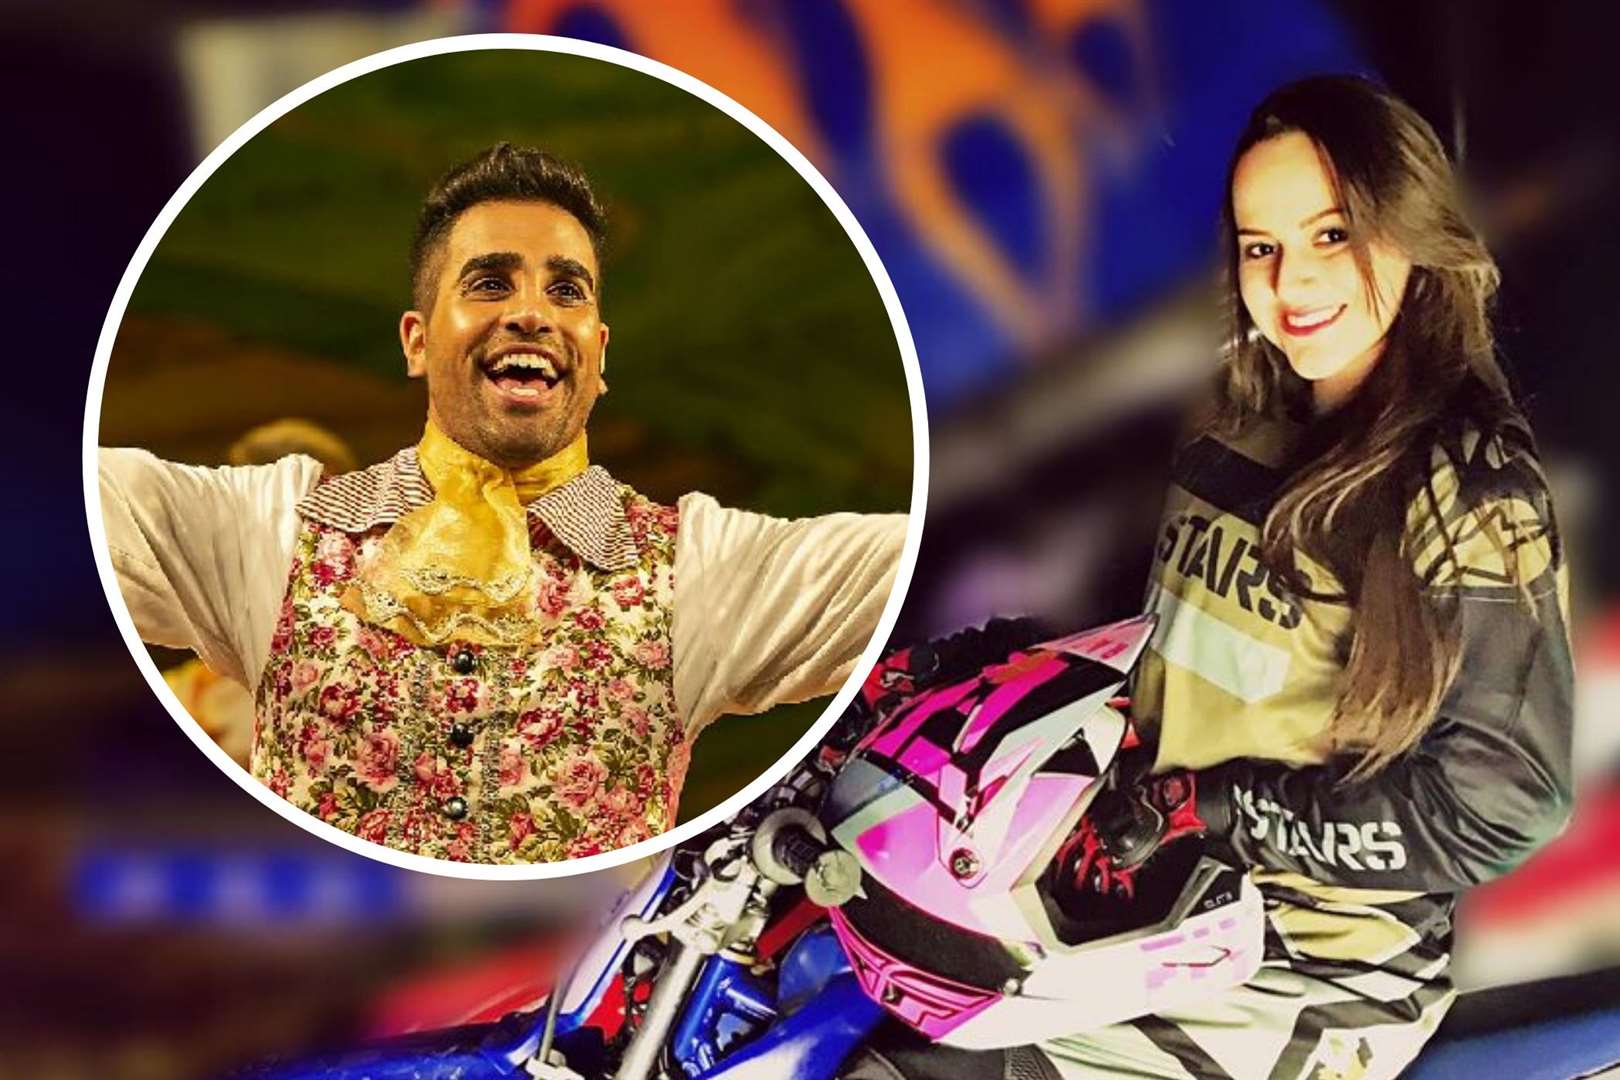 Dr Ranj rushed to the aid of stunt rider Drueicy Madorf